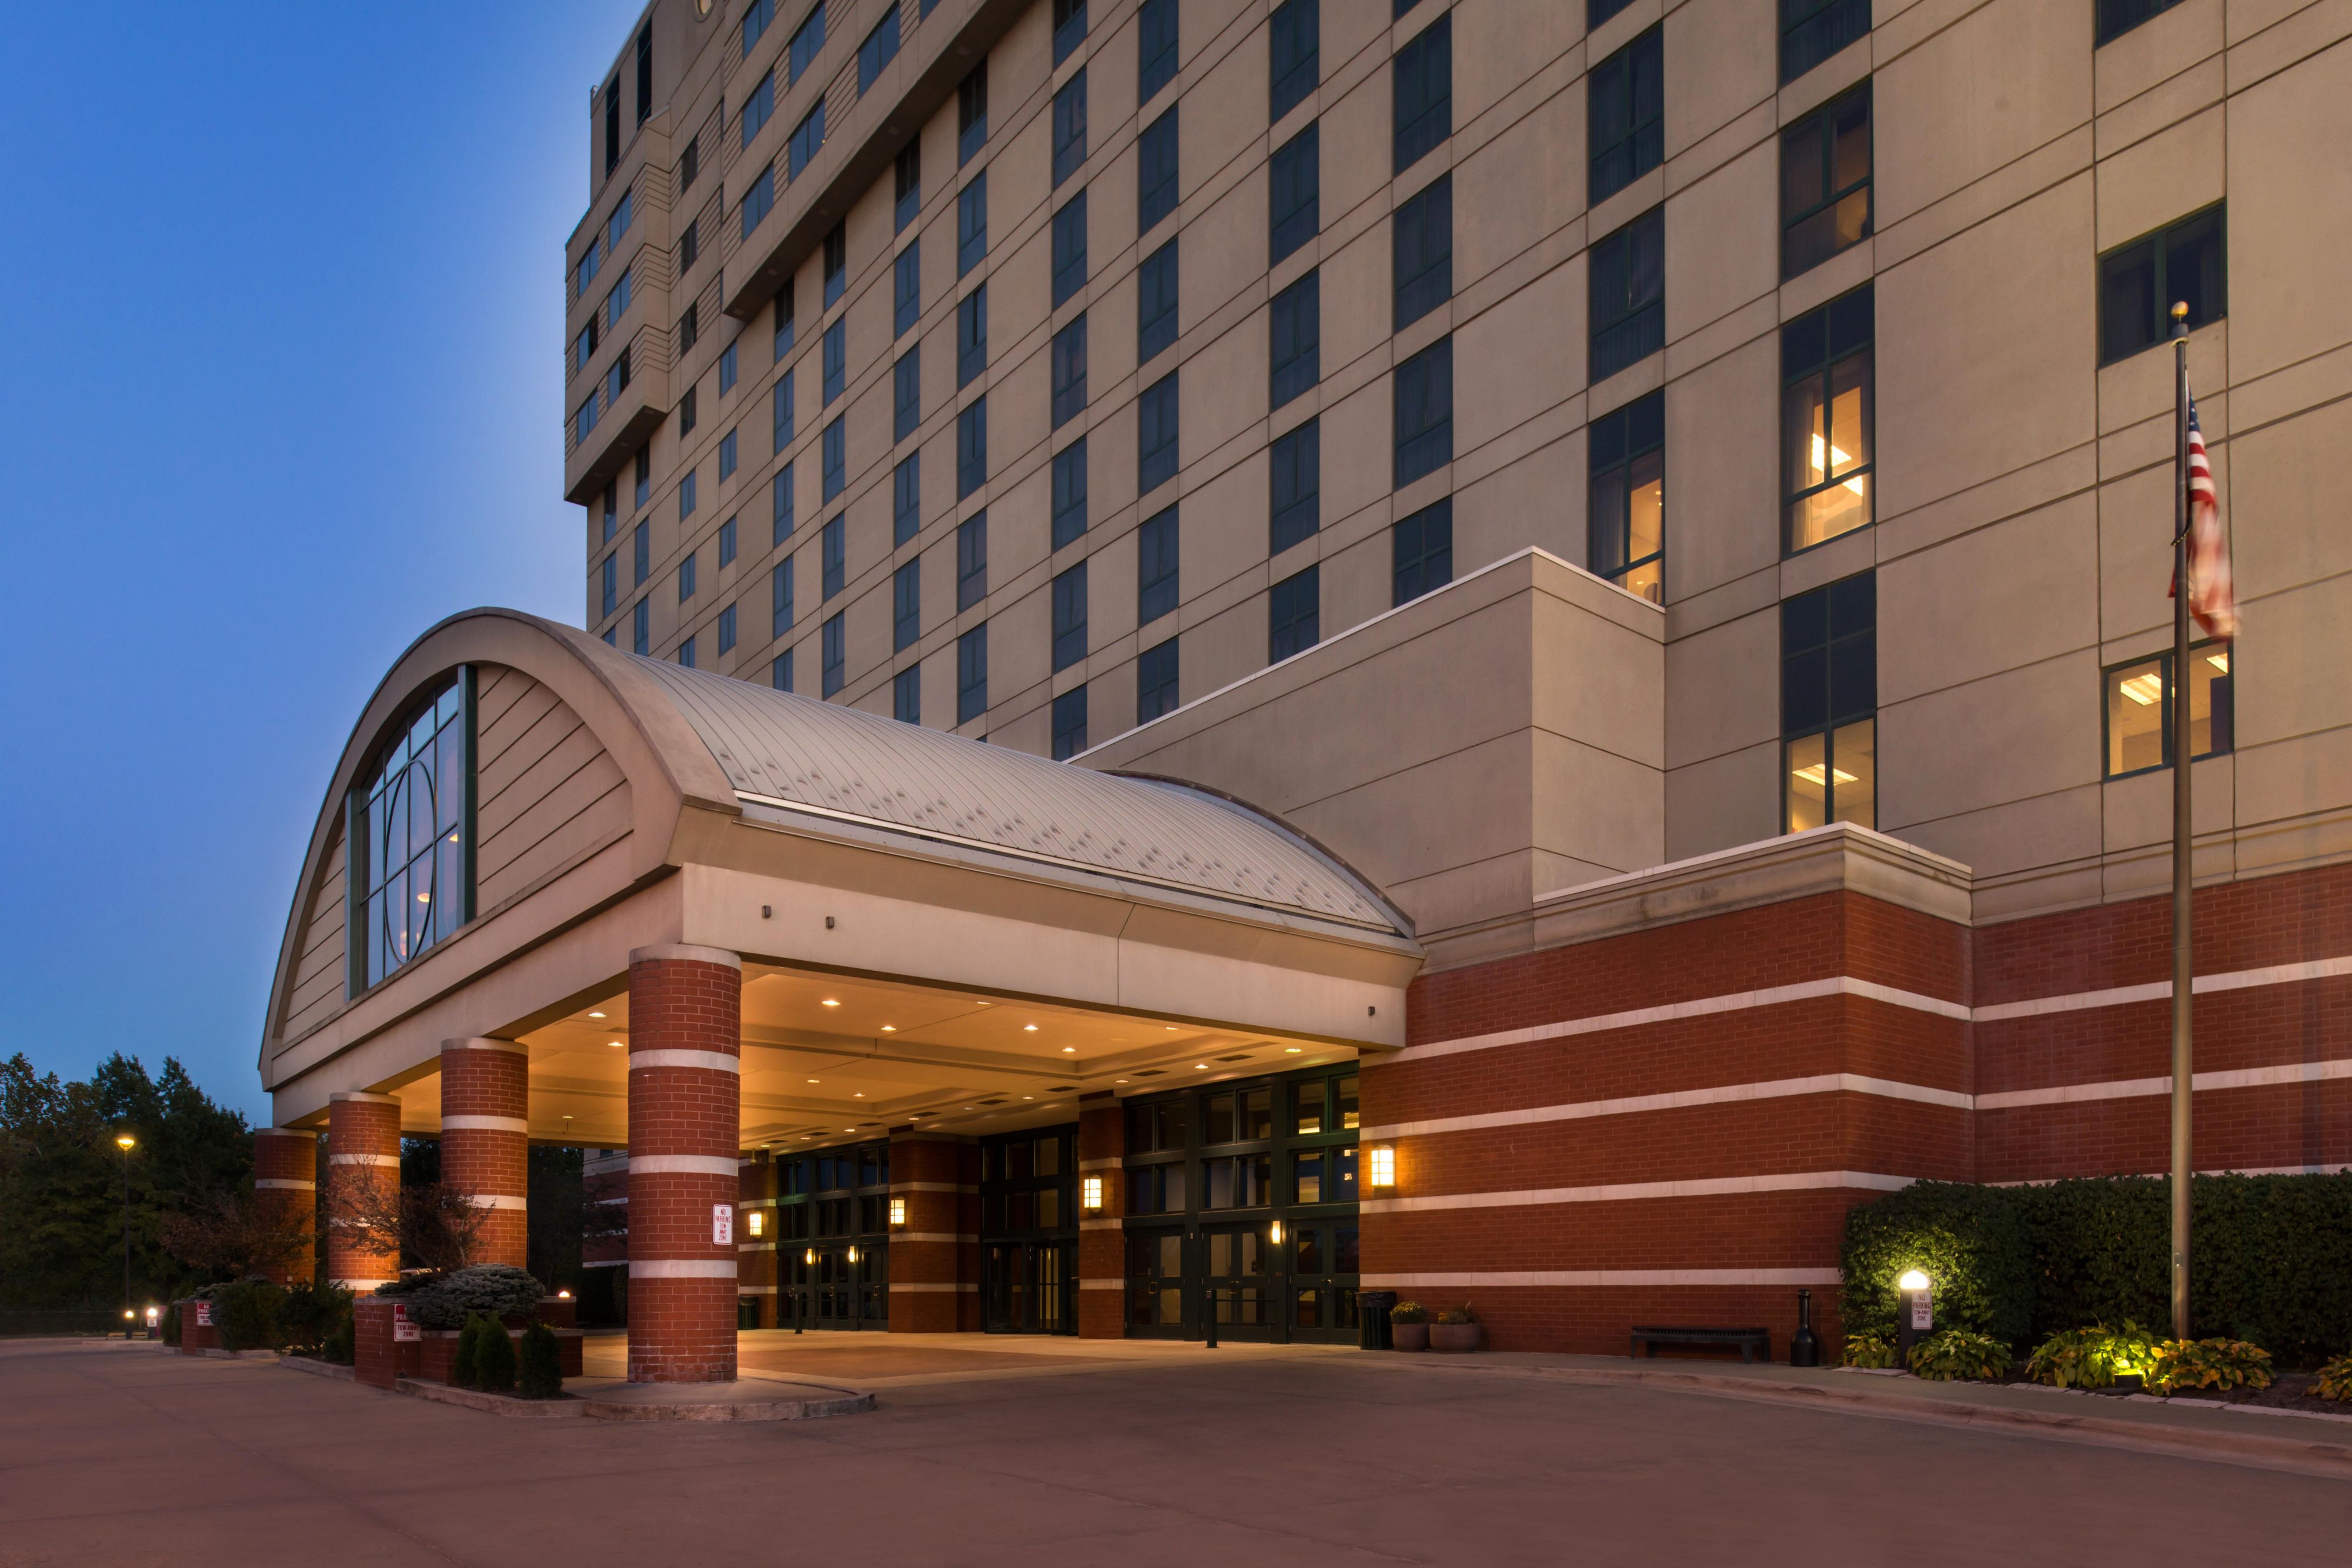 Crowne Plaza is located within 2 miles of University of Illinois